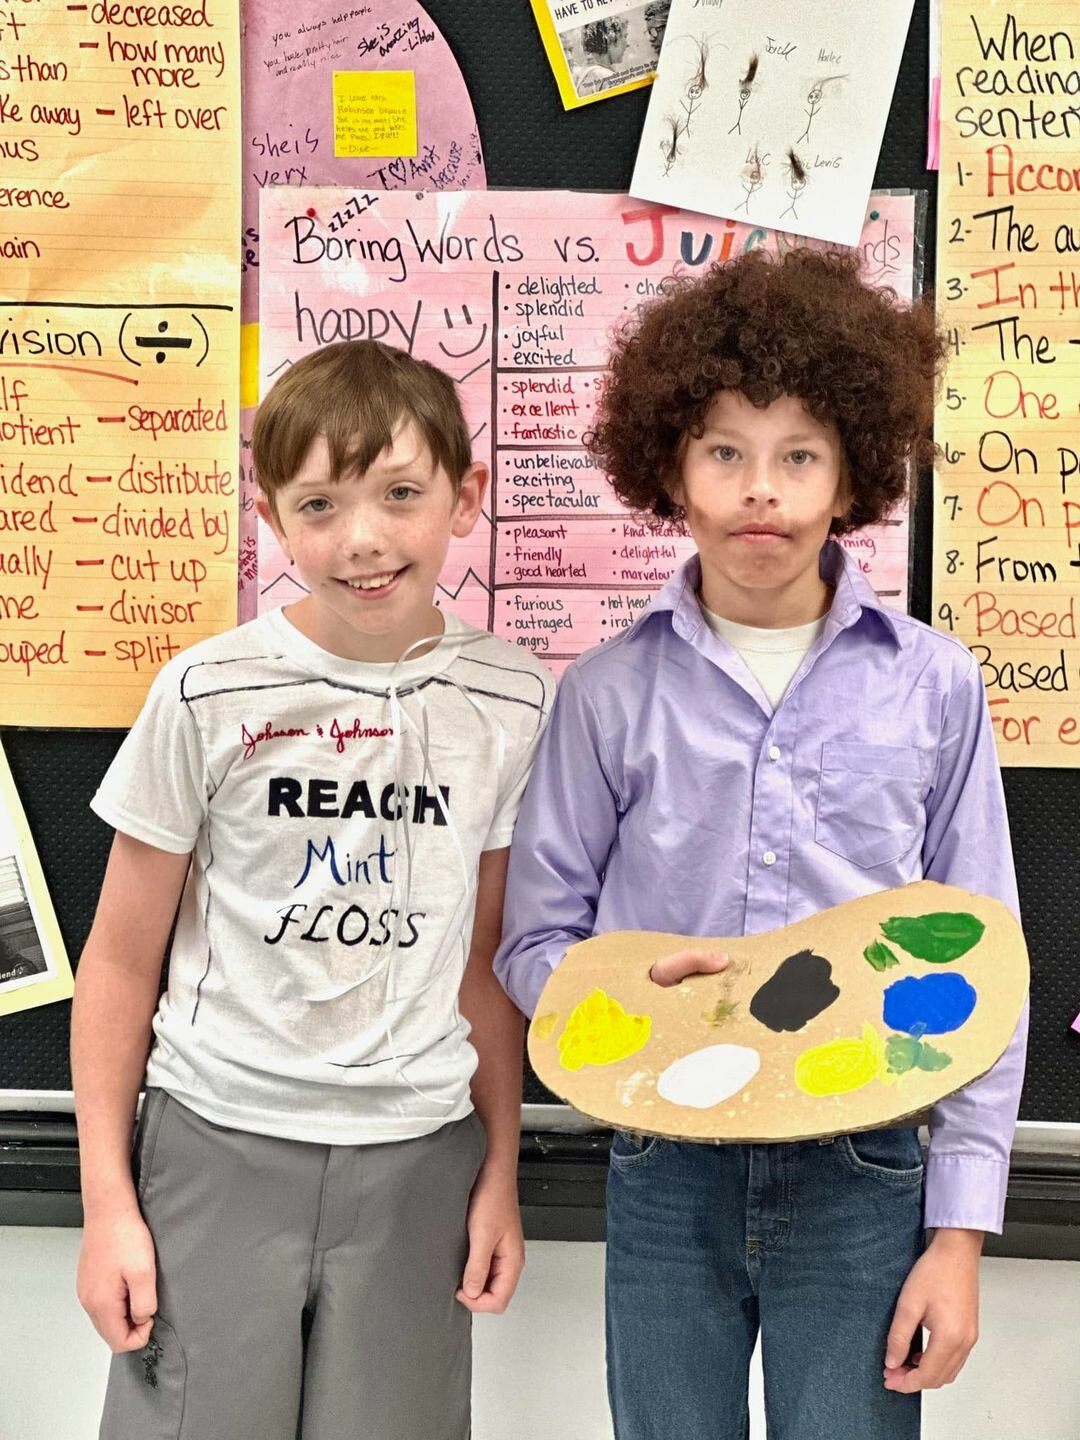 Winners of the Rhyme without Reason Facebook Contest Hunter Johnson and Evan Brumley